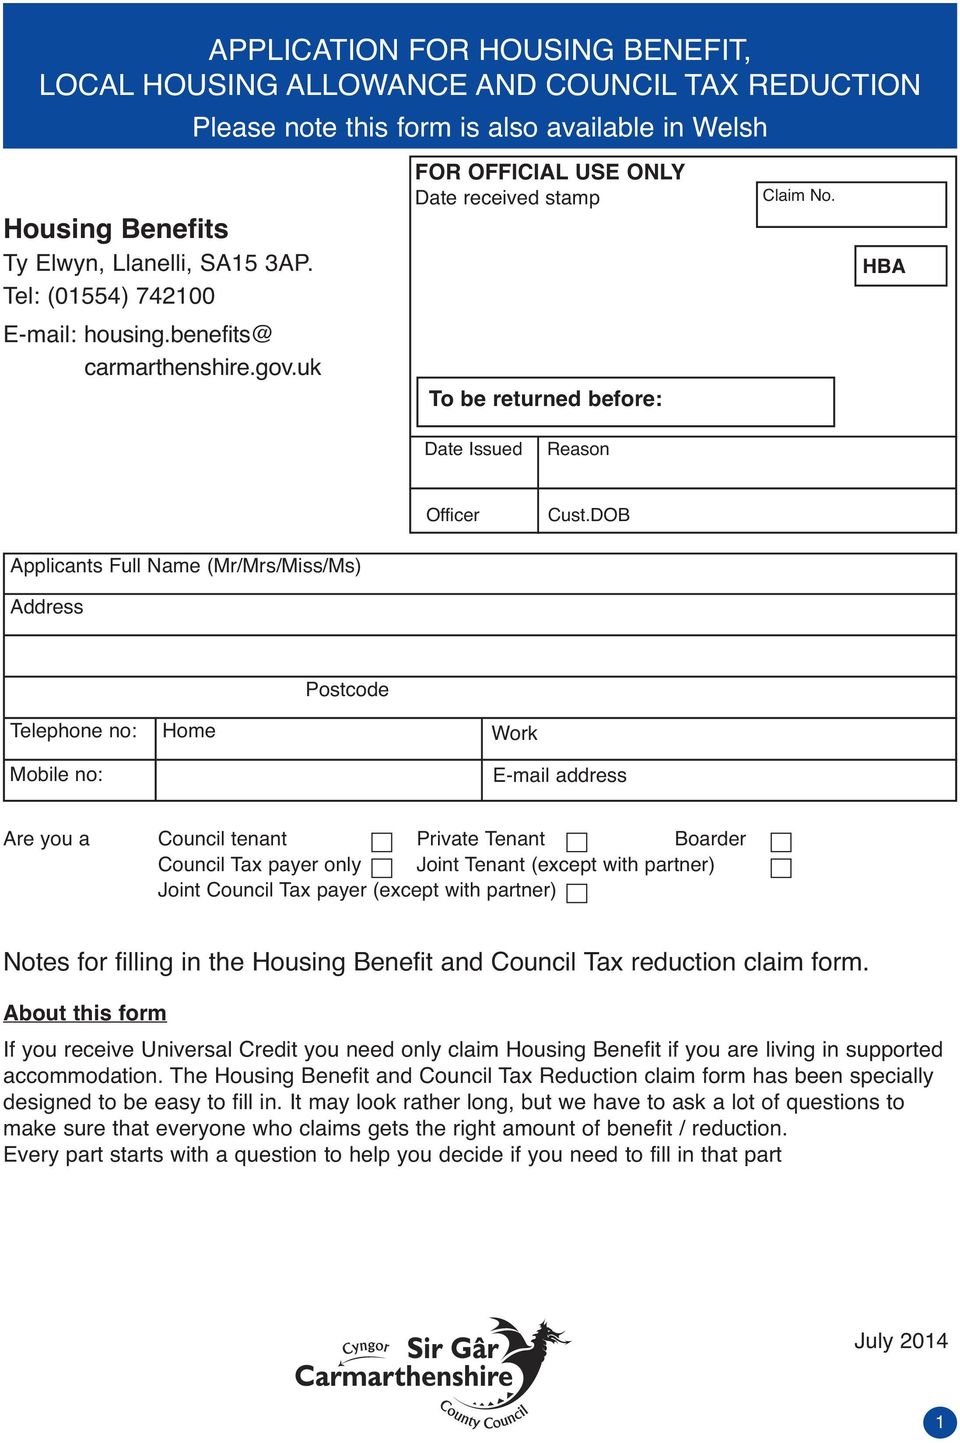 DOB Applicants Full Name (Mr/Mrs/Miss/Ms) Address Postcode Telephone no: Mobile no: Home Work E-mail address Are you a Council tenant Private Tenant Boarder Council Tax payer only Joint Tenant